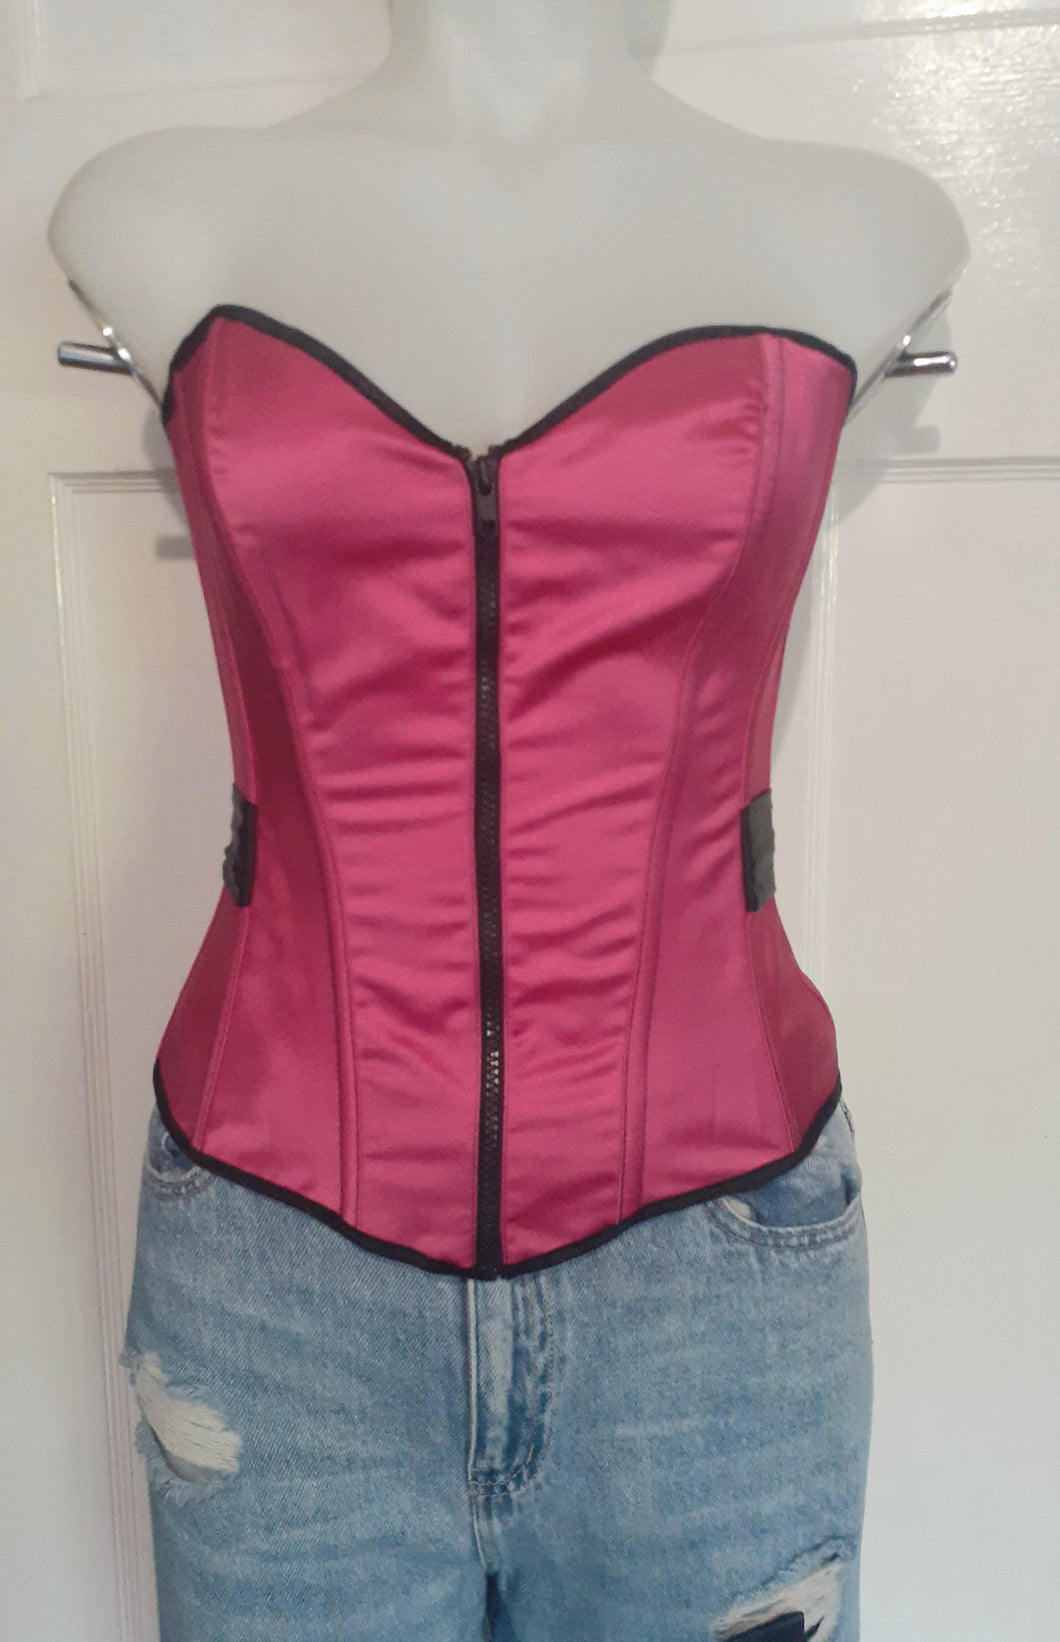 SHIRLEY OF HOLLYWOOD - Satin Pink Zip-Up Bustier with Tie-Up Front or ...